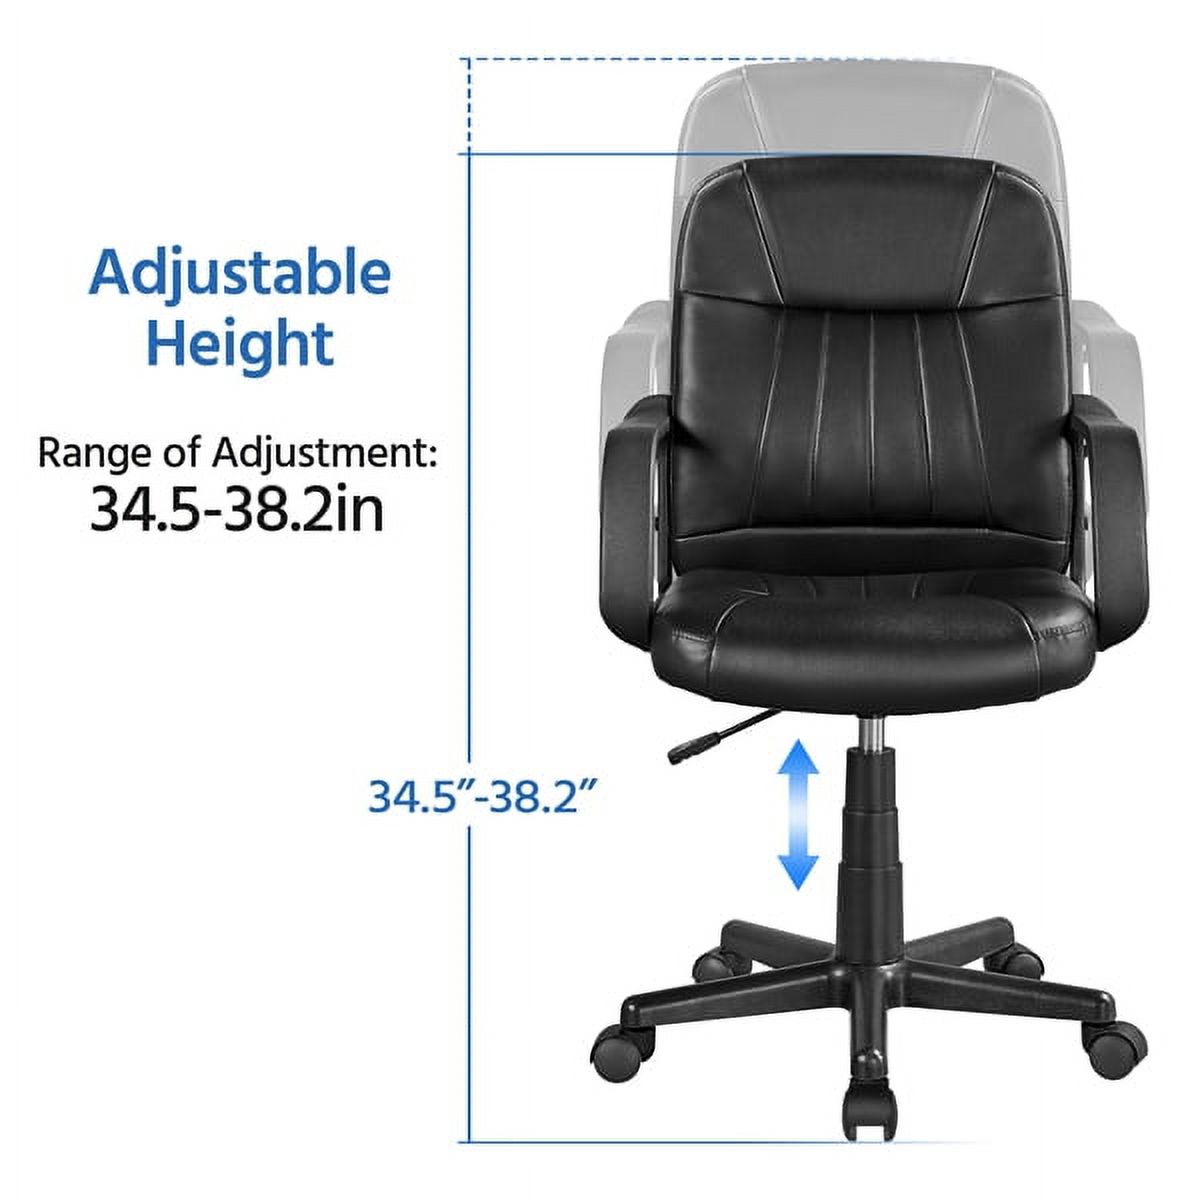 SMILE MART Adjustable Faux Leather Swivel Office Chair, Black - image 3 of 12